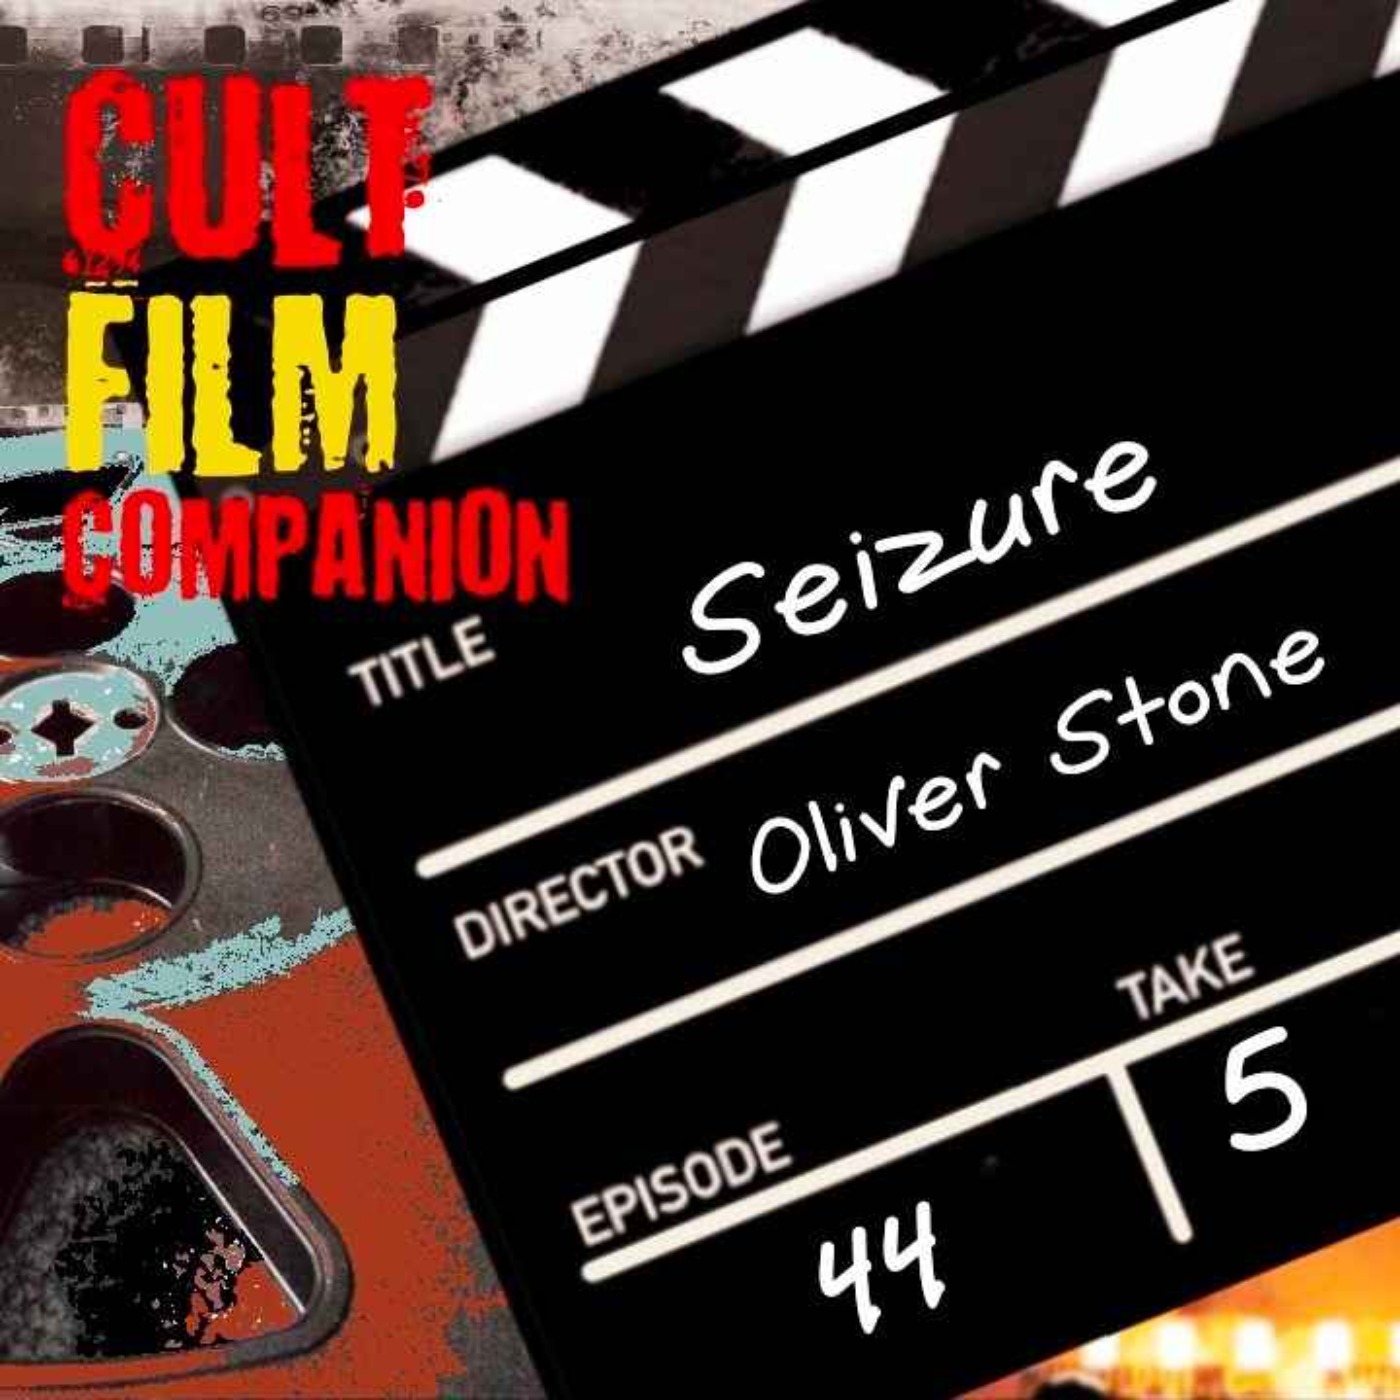 Ep. 44 Seizure directed by Oliver Stone